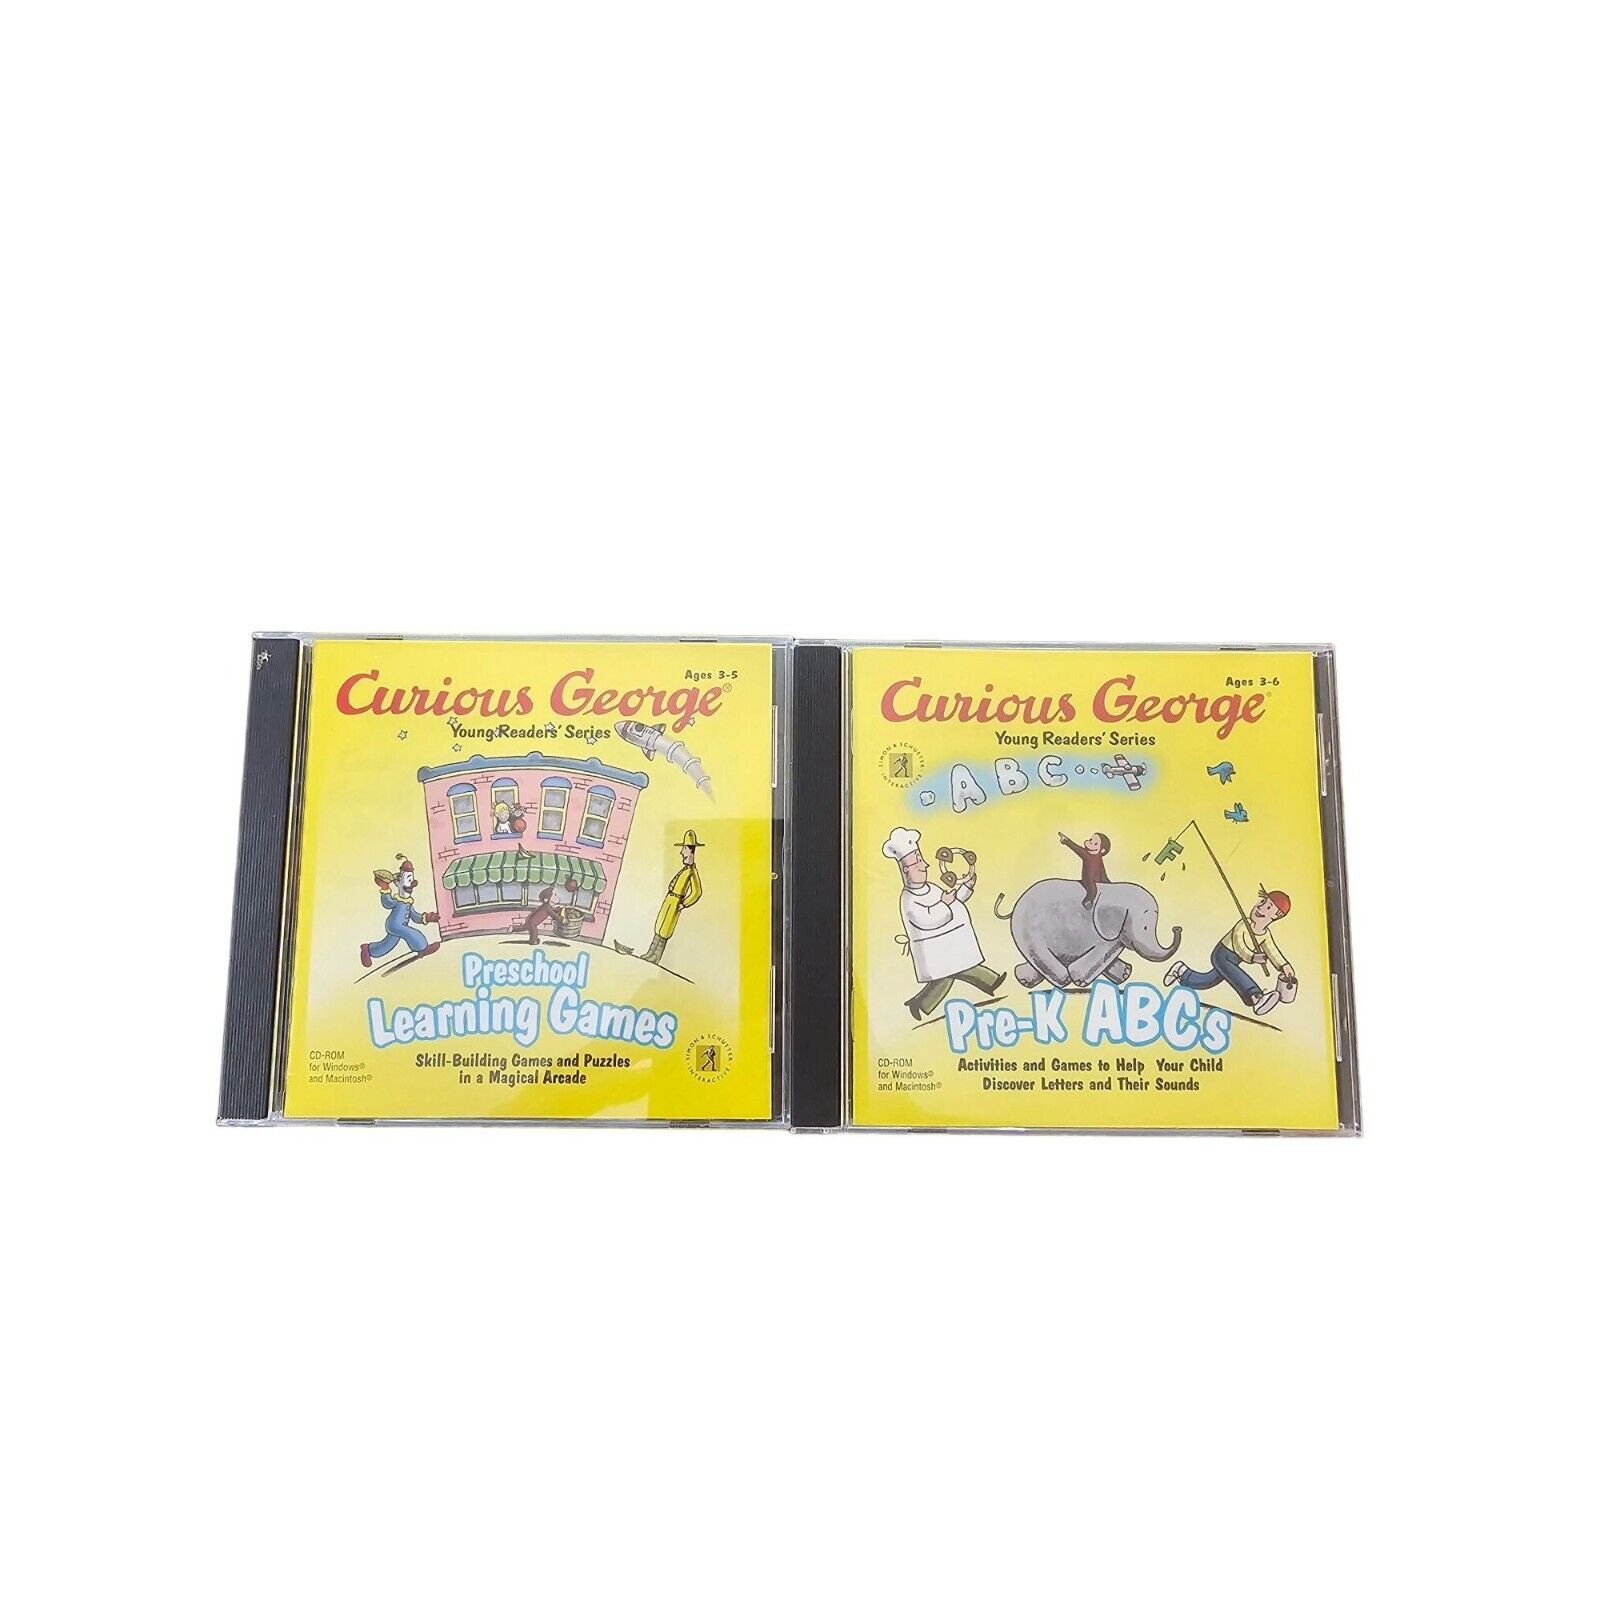 Curious George CD ROMs Lot of 2 Preschool Learning Games and Pre-K ABCs Win/Mac